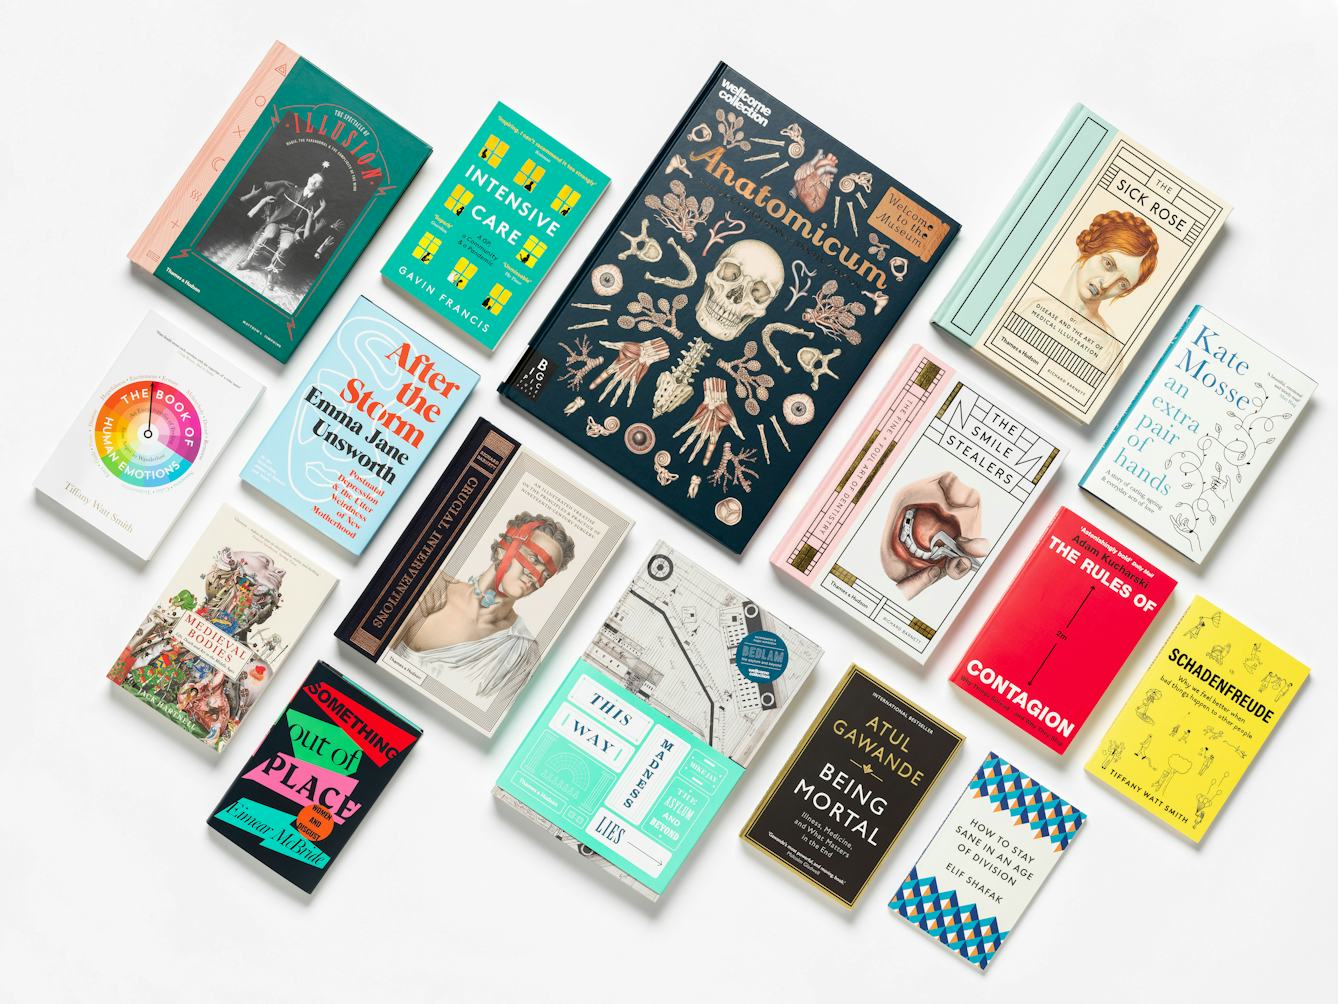 Photograph of 16 books lying flat on their backs arranged in a loose grid on the diagonal. The covers range in colour and design. They have been photographed on a white background with a small grounding shadow.